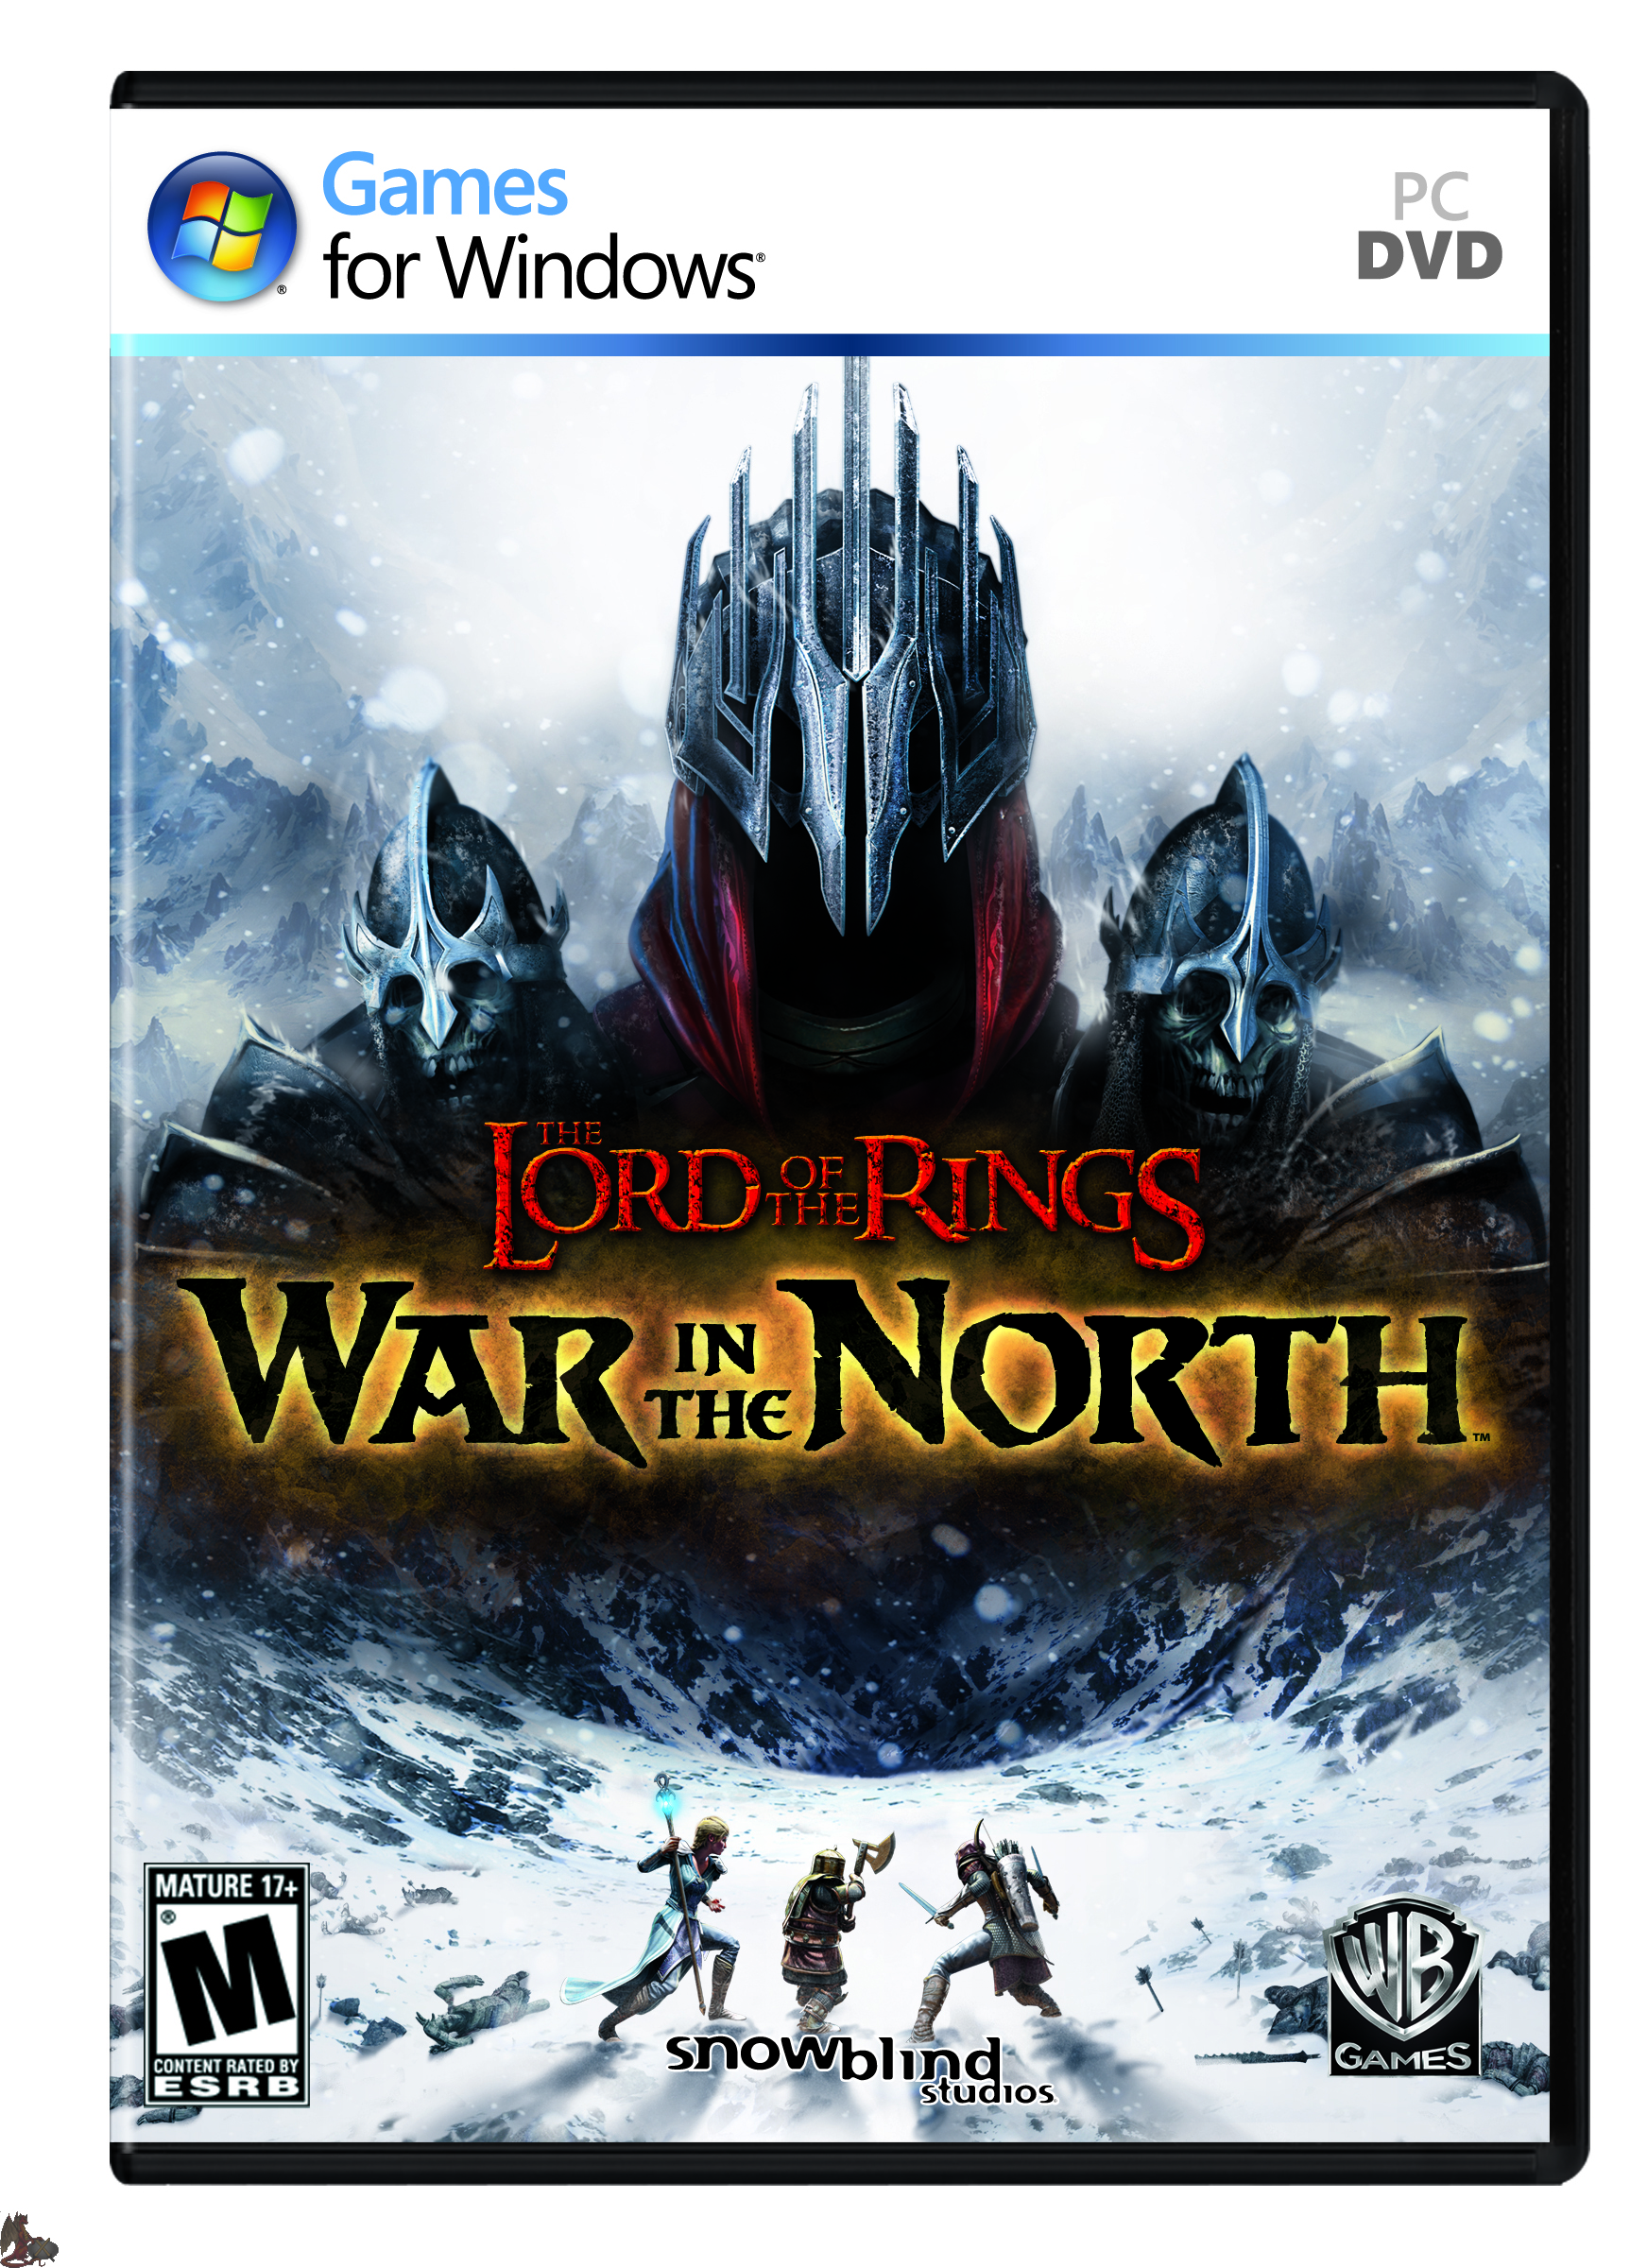 Lord of the rings war in the north купить steam фото 52